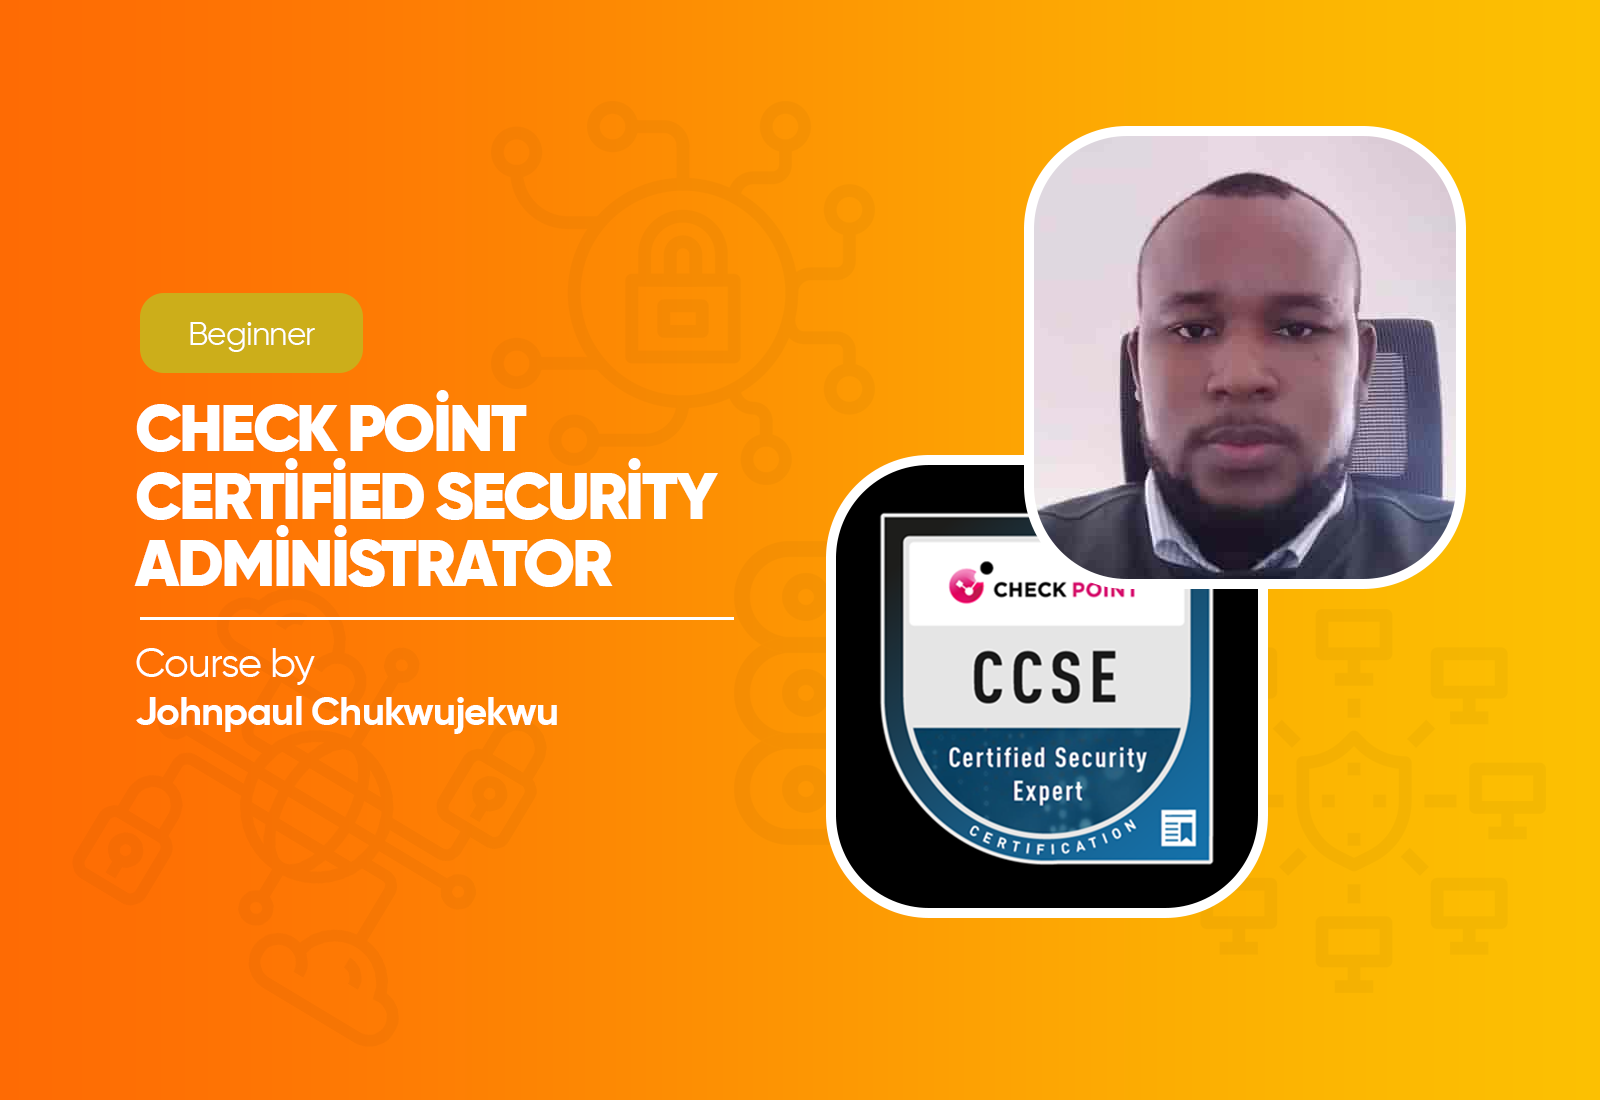 Check Point Certified Security Administrator Course